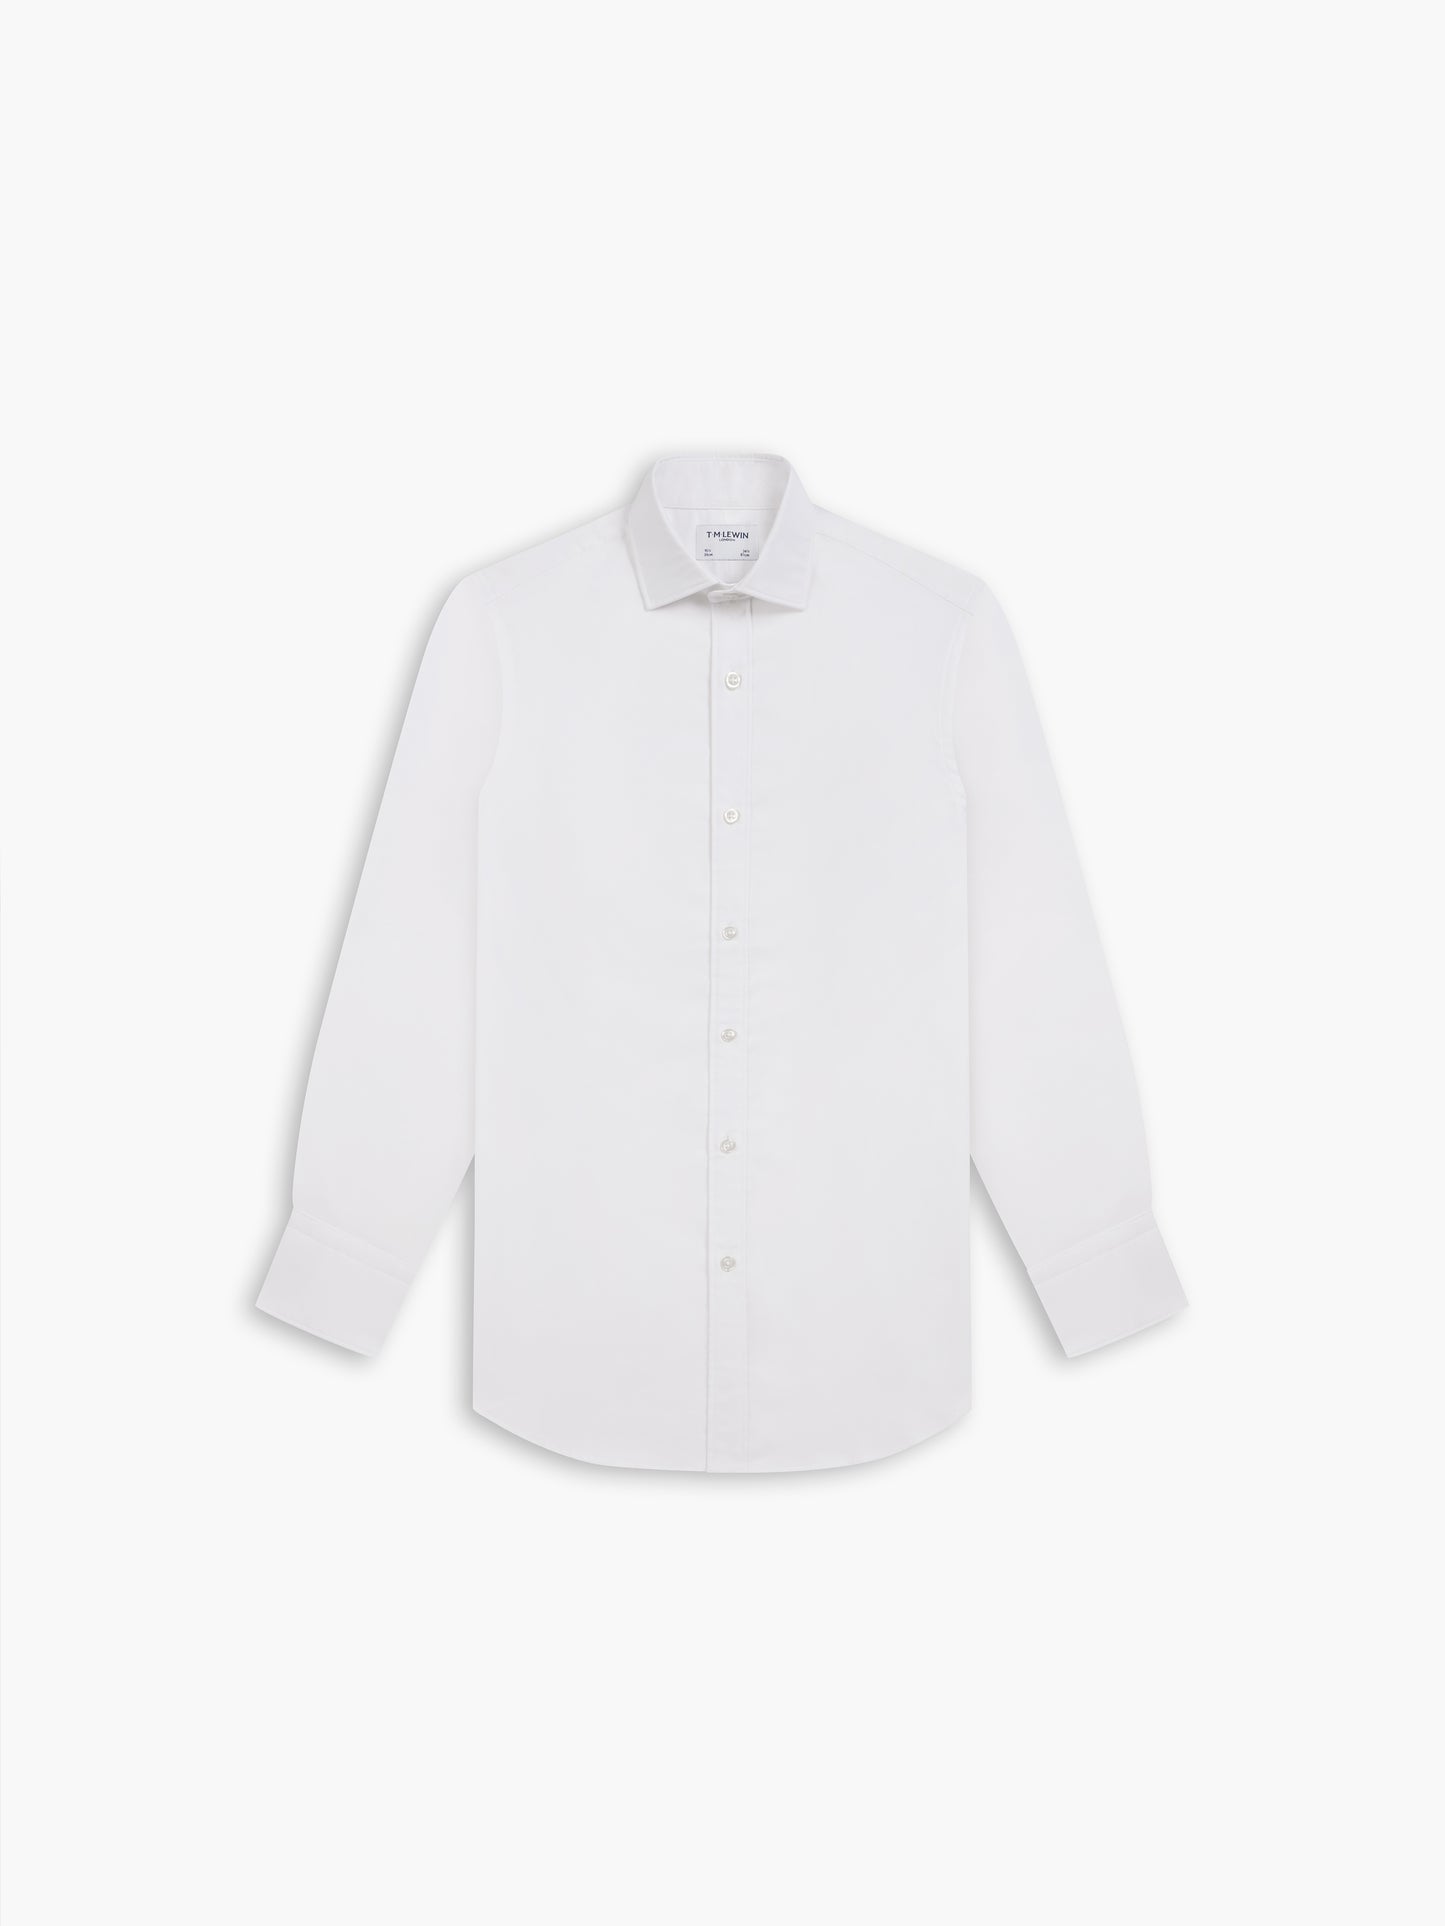 White Royal Oxford Fitted Single Cuff Classic Collar Shirt